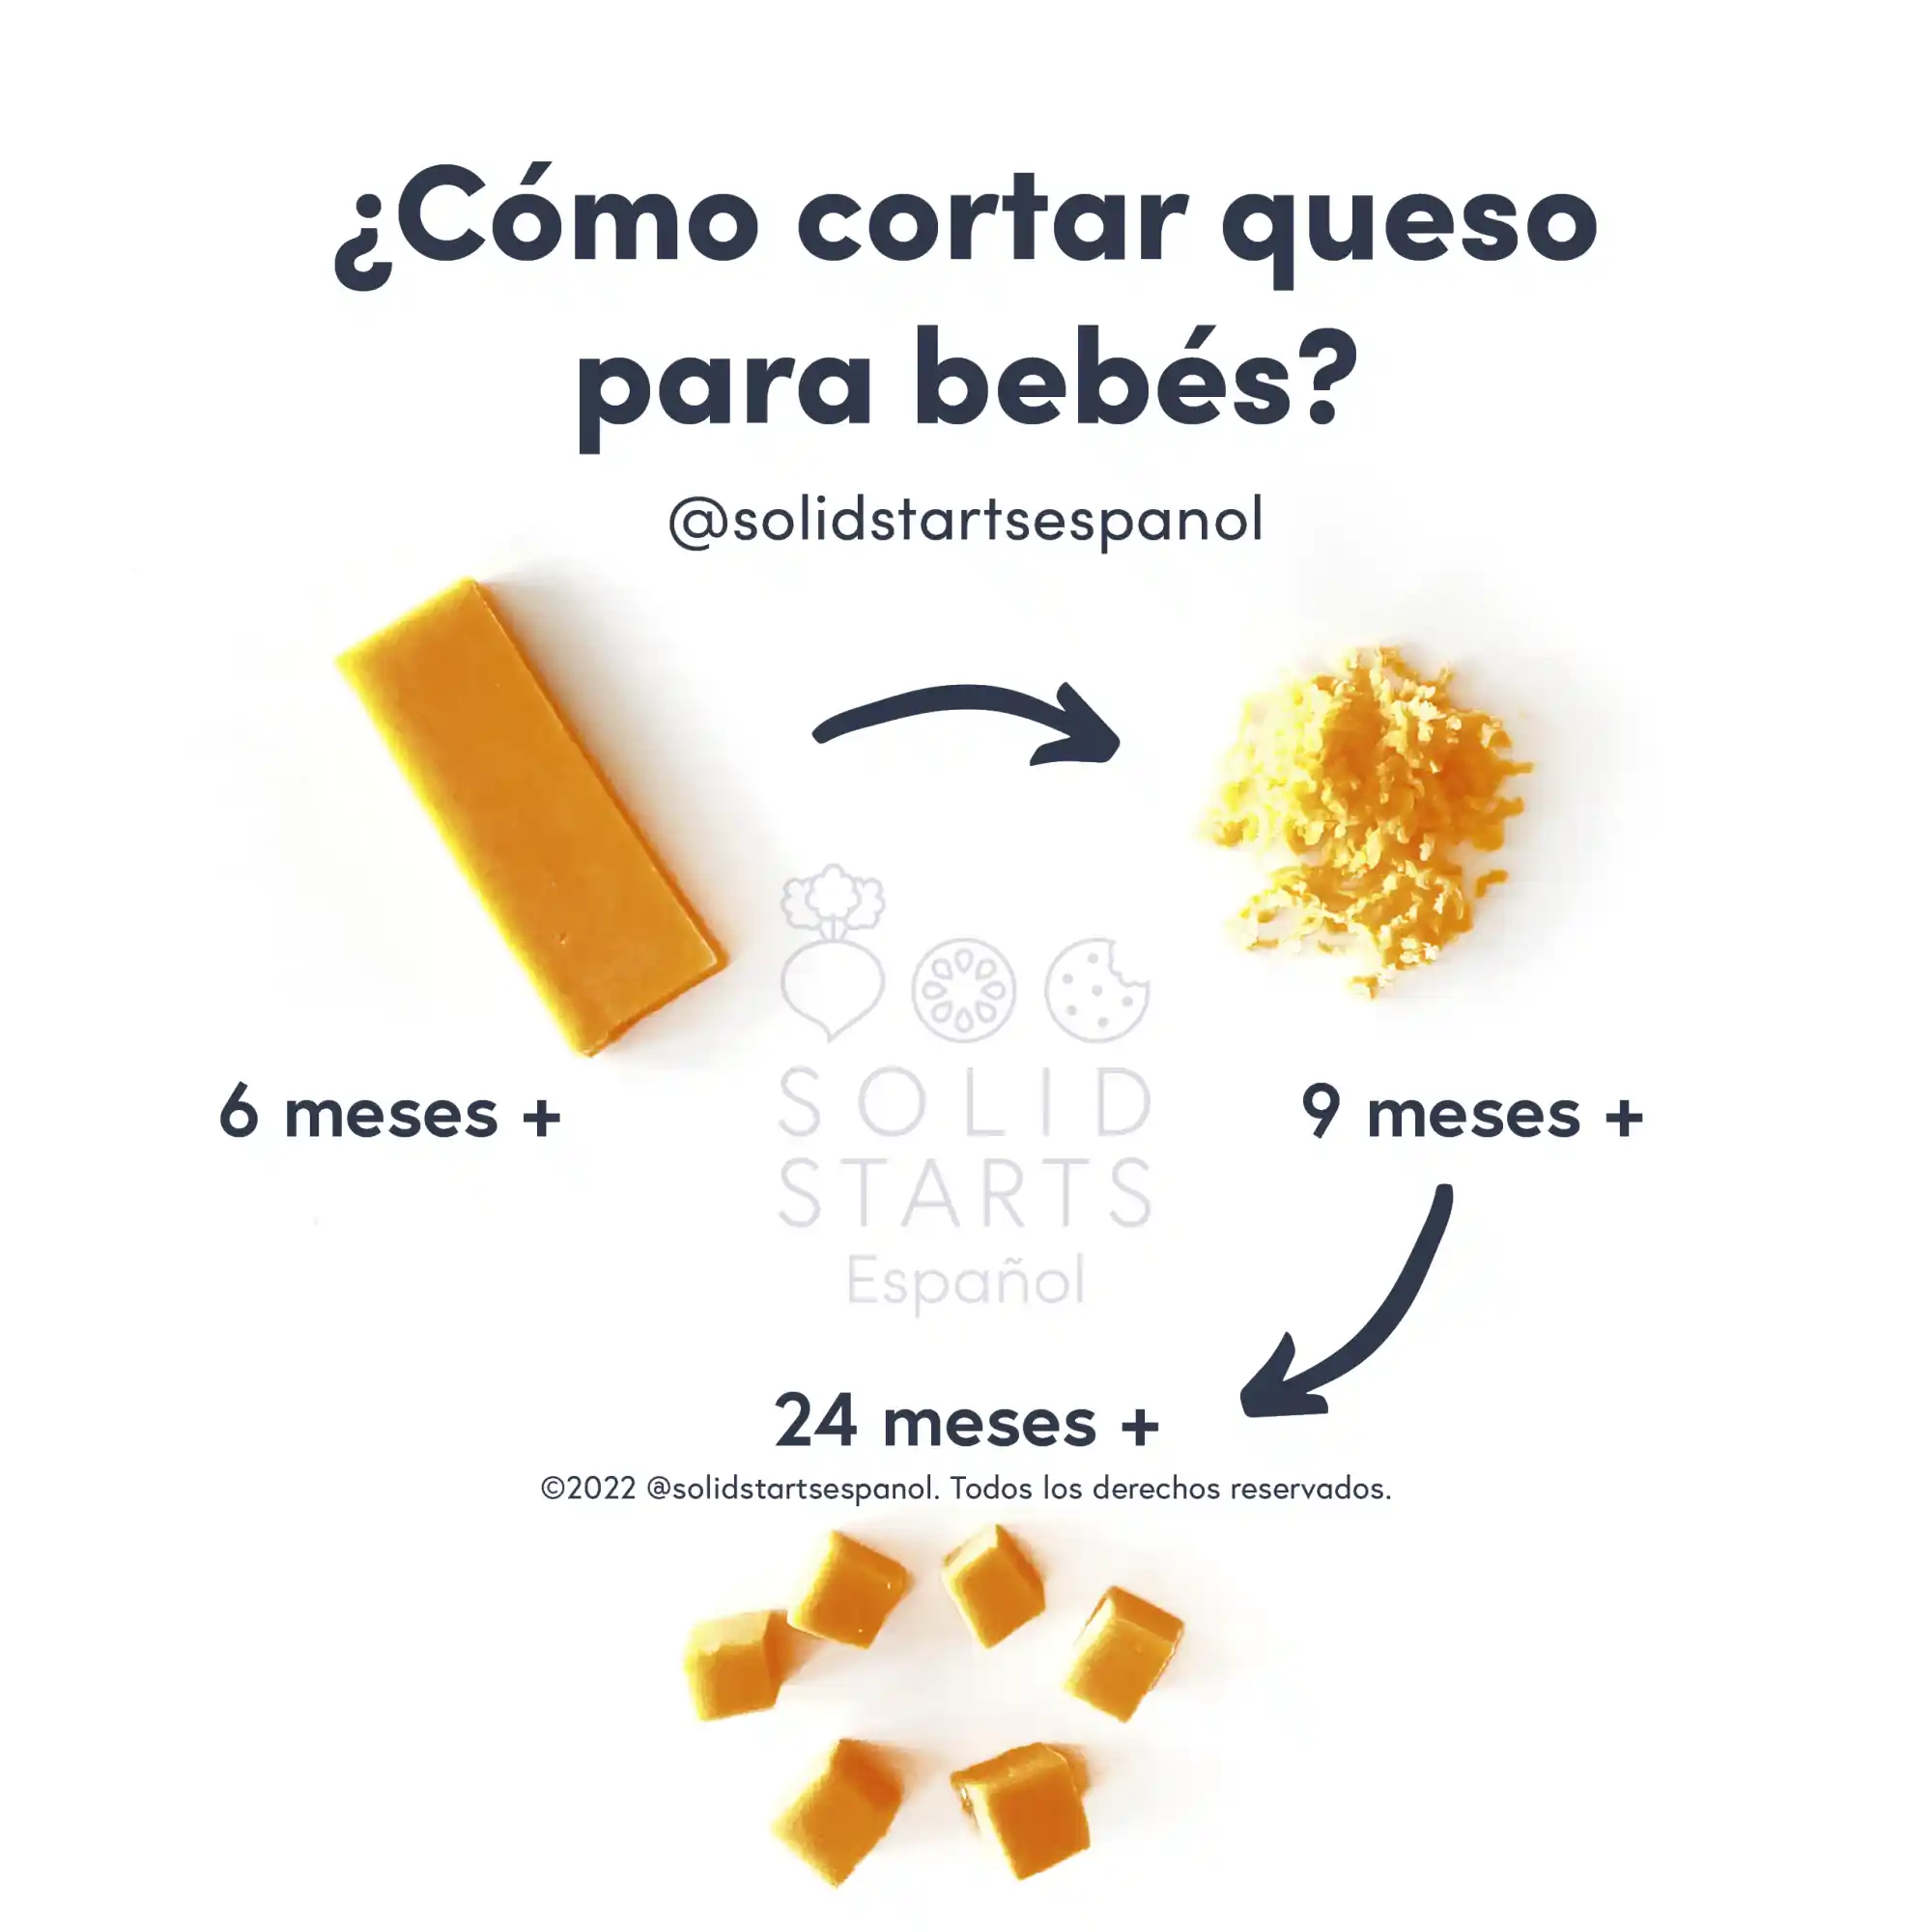 an infographic with the header "how to cut cheese for babies": a ruler thin slice of cheese for 6 months+, grated for 9 months+, small cubes for 24 months+